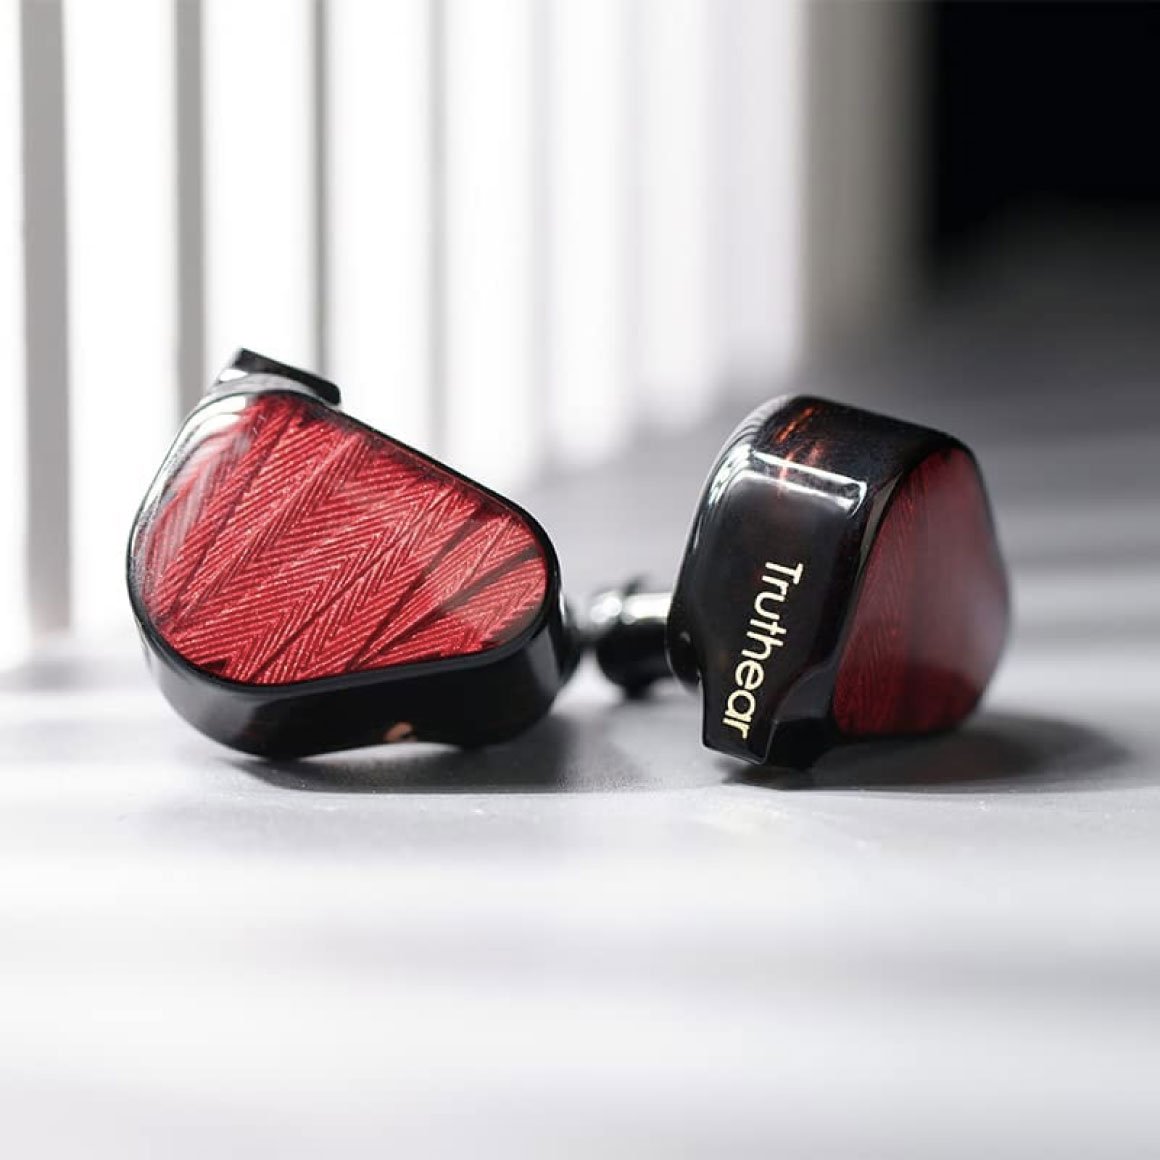 Truthear and Crinacle Unite to Redefine Audiophile Perfection with the Launch of ZERO:RED